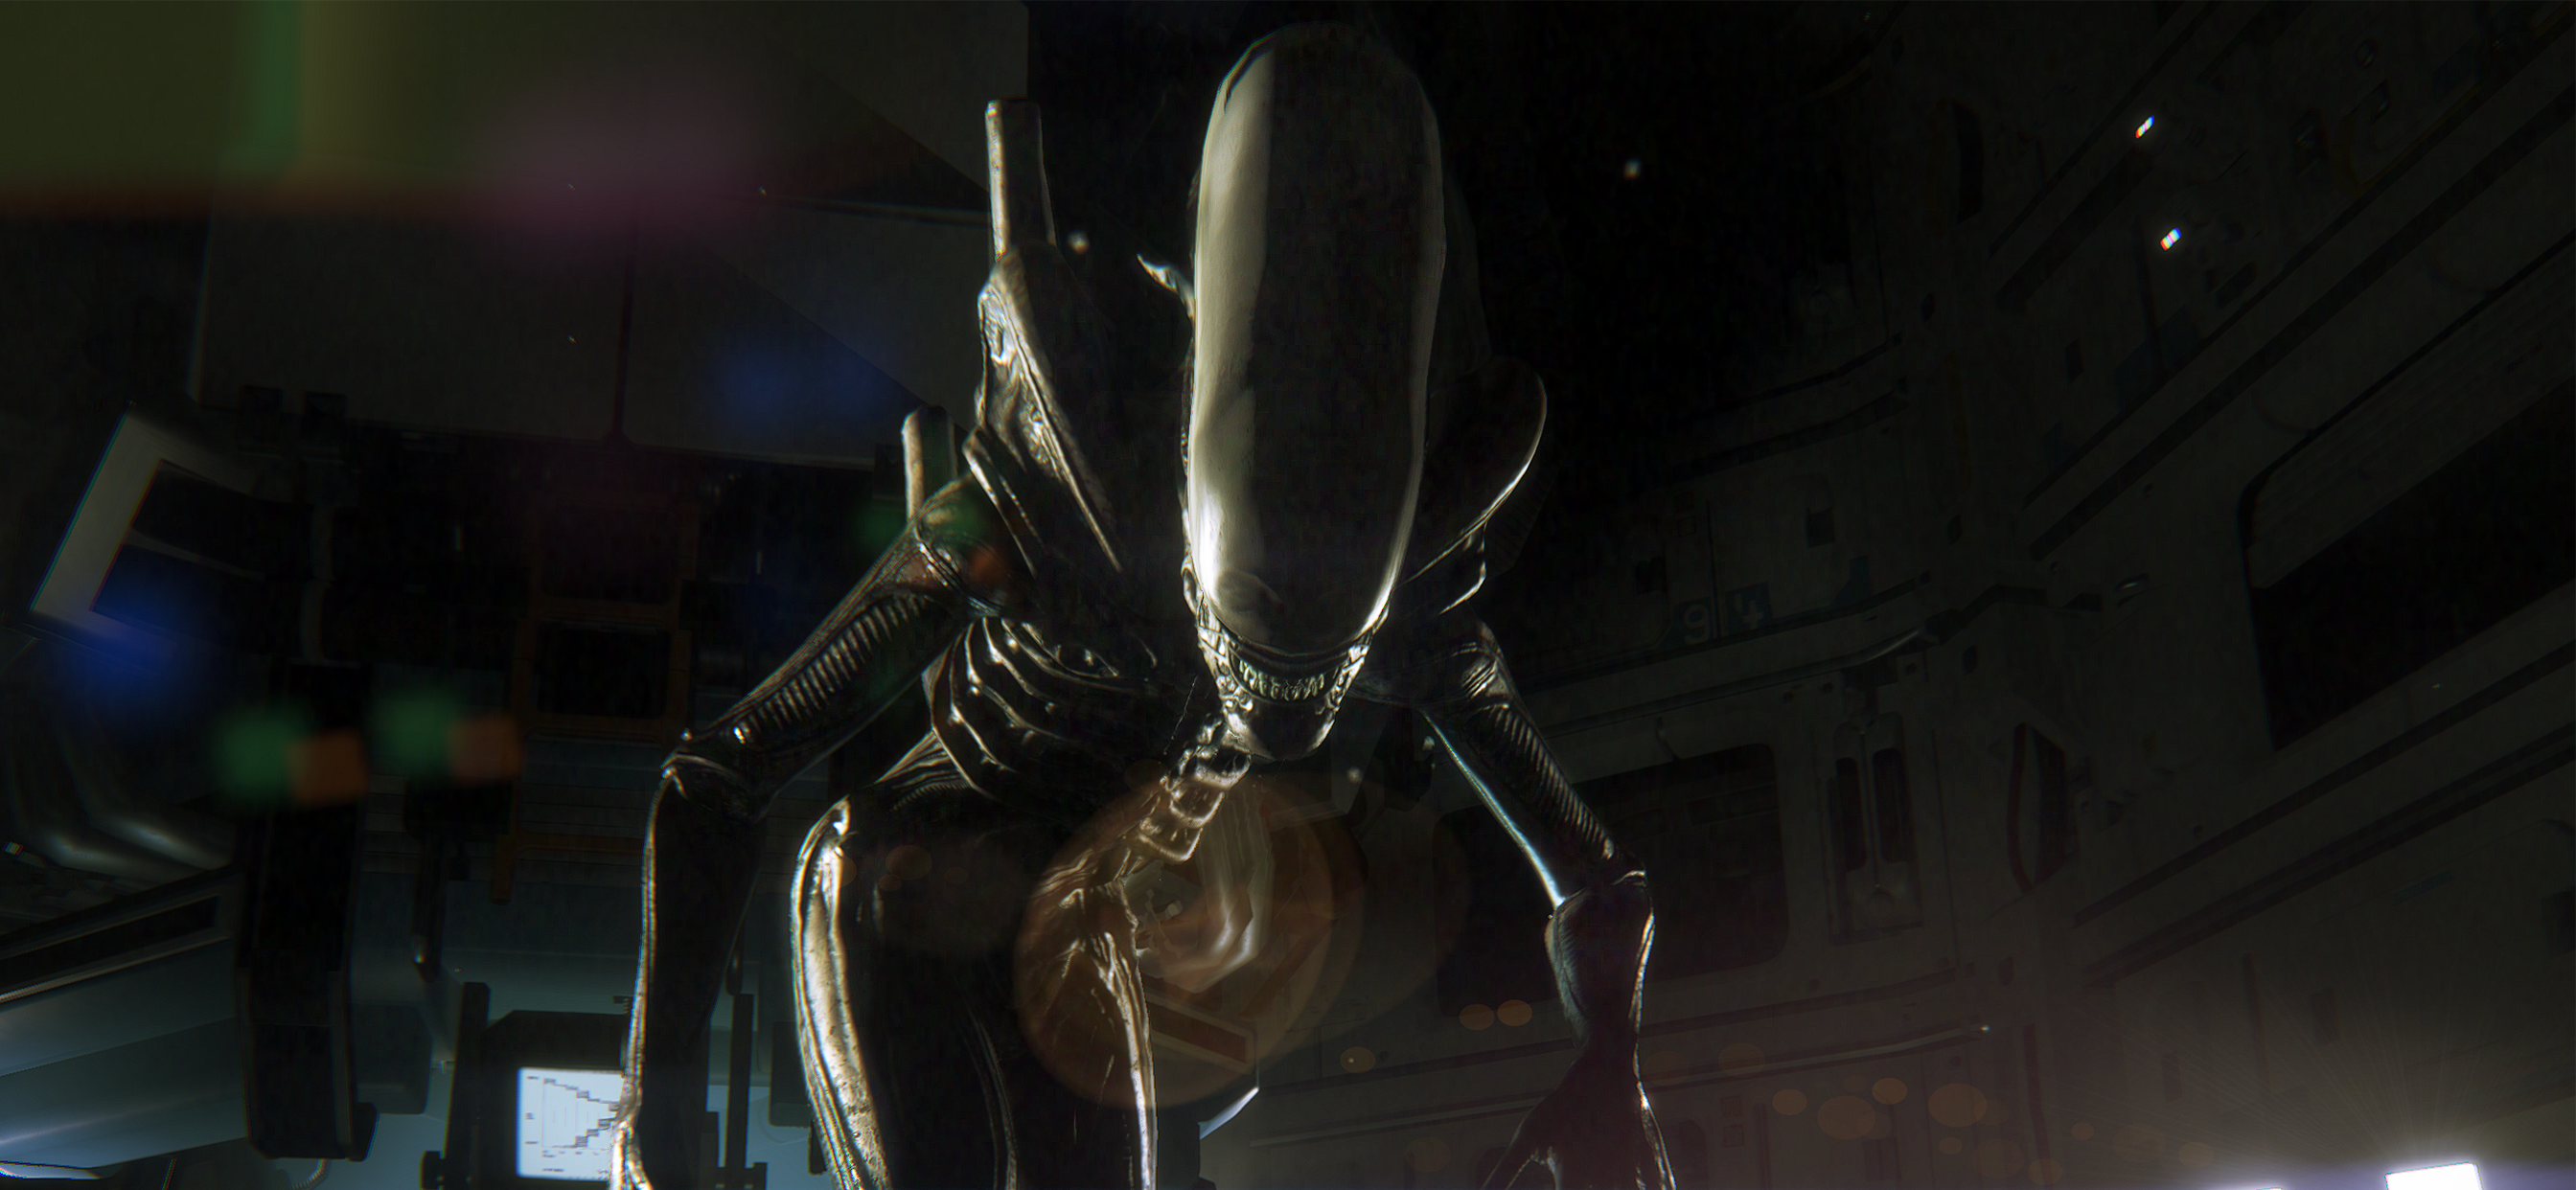 ‘Alien: Isolation’ from Creative Assembly is coming to iOS and Android through Feral Interactive next month with all DLC included, pre-orders now live